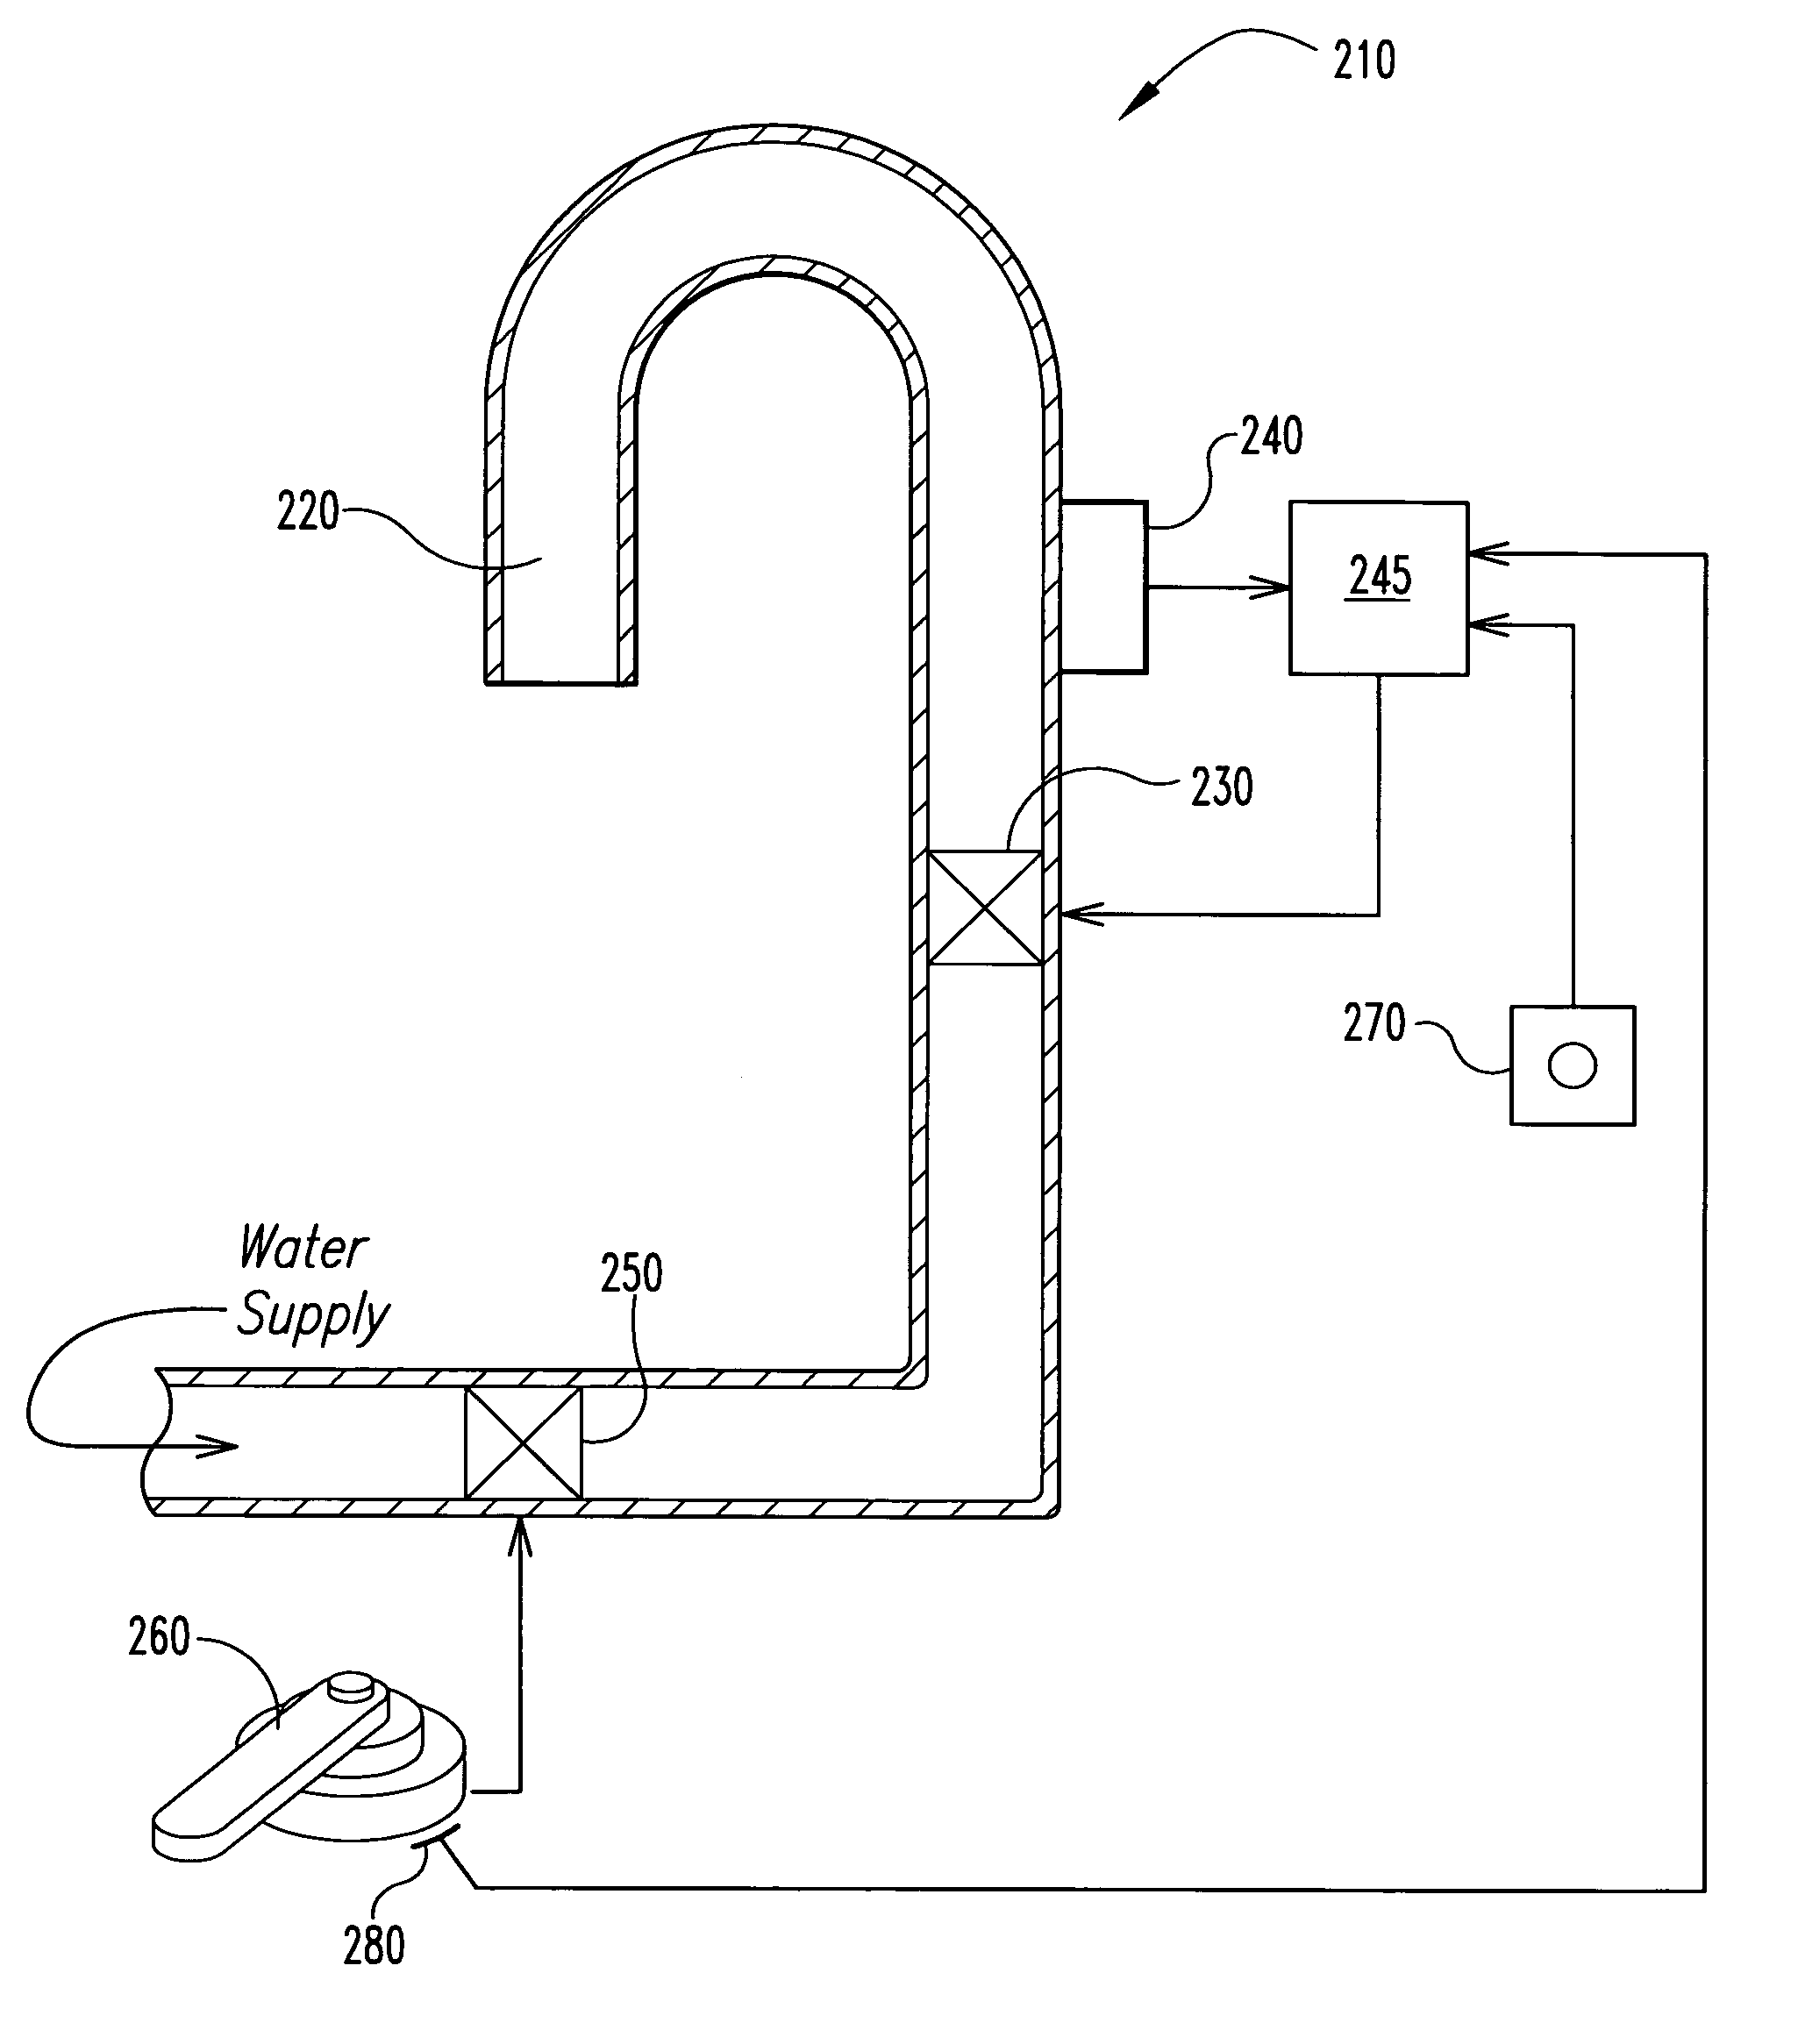 Capacitive touch on/off control for an automatic residential faucet